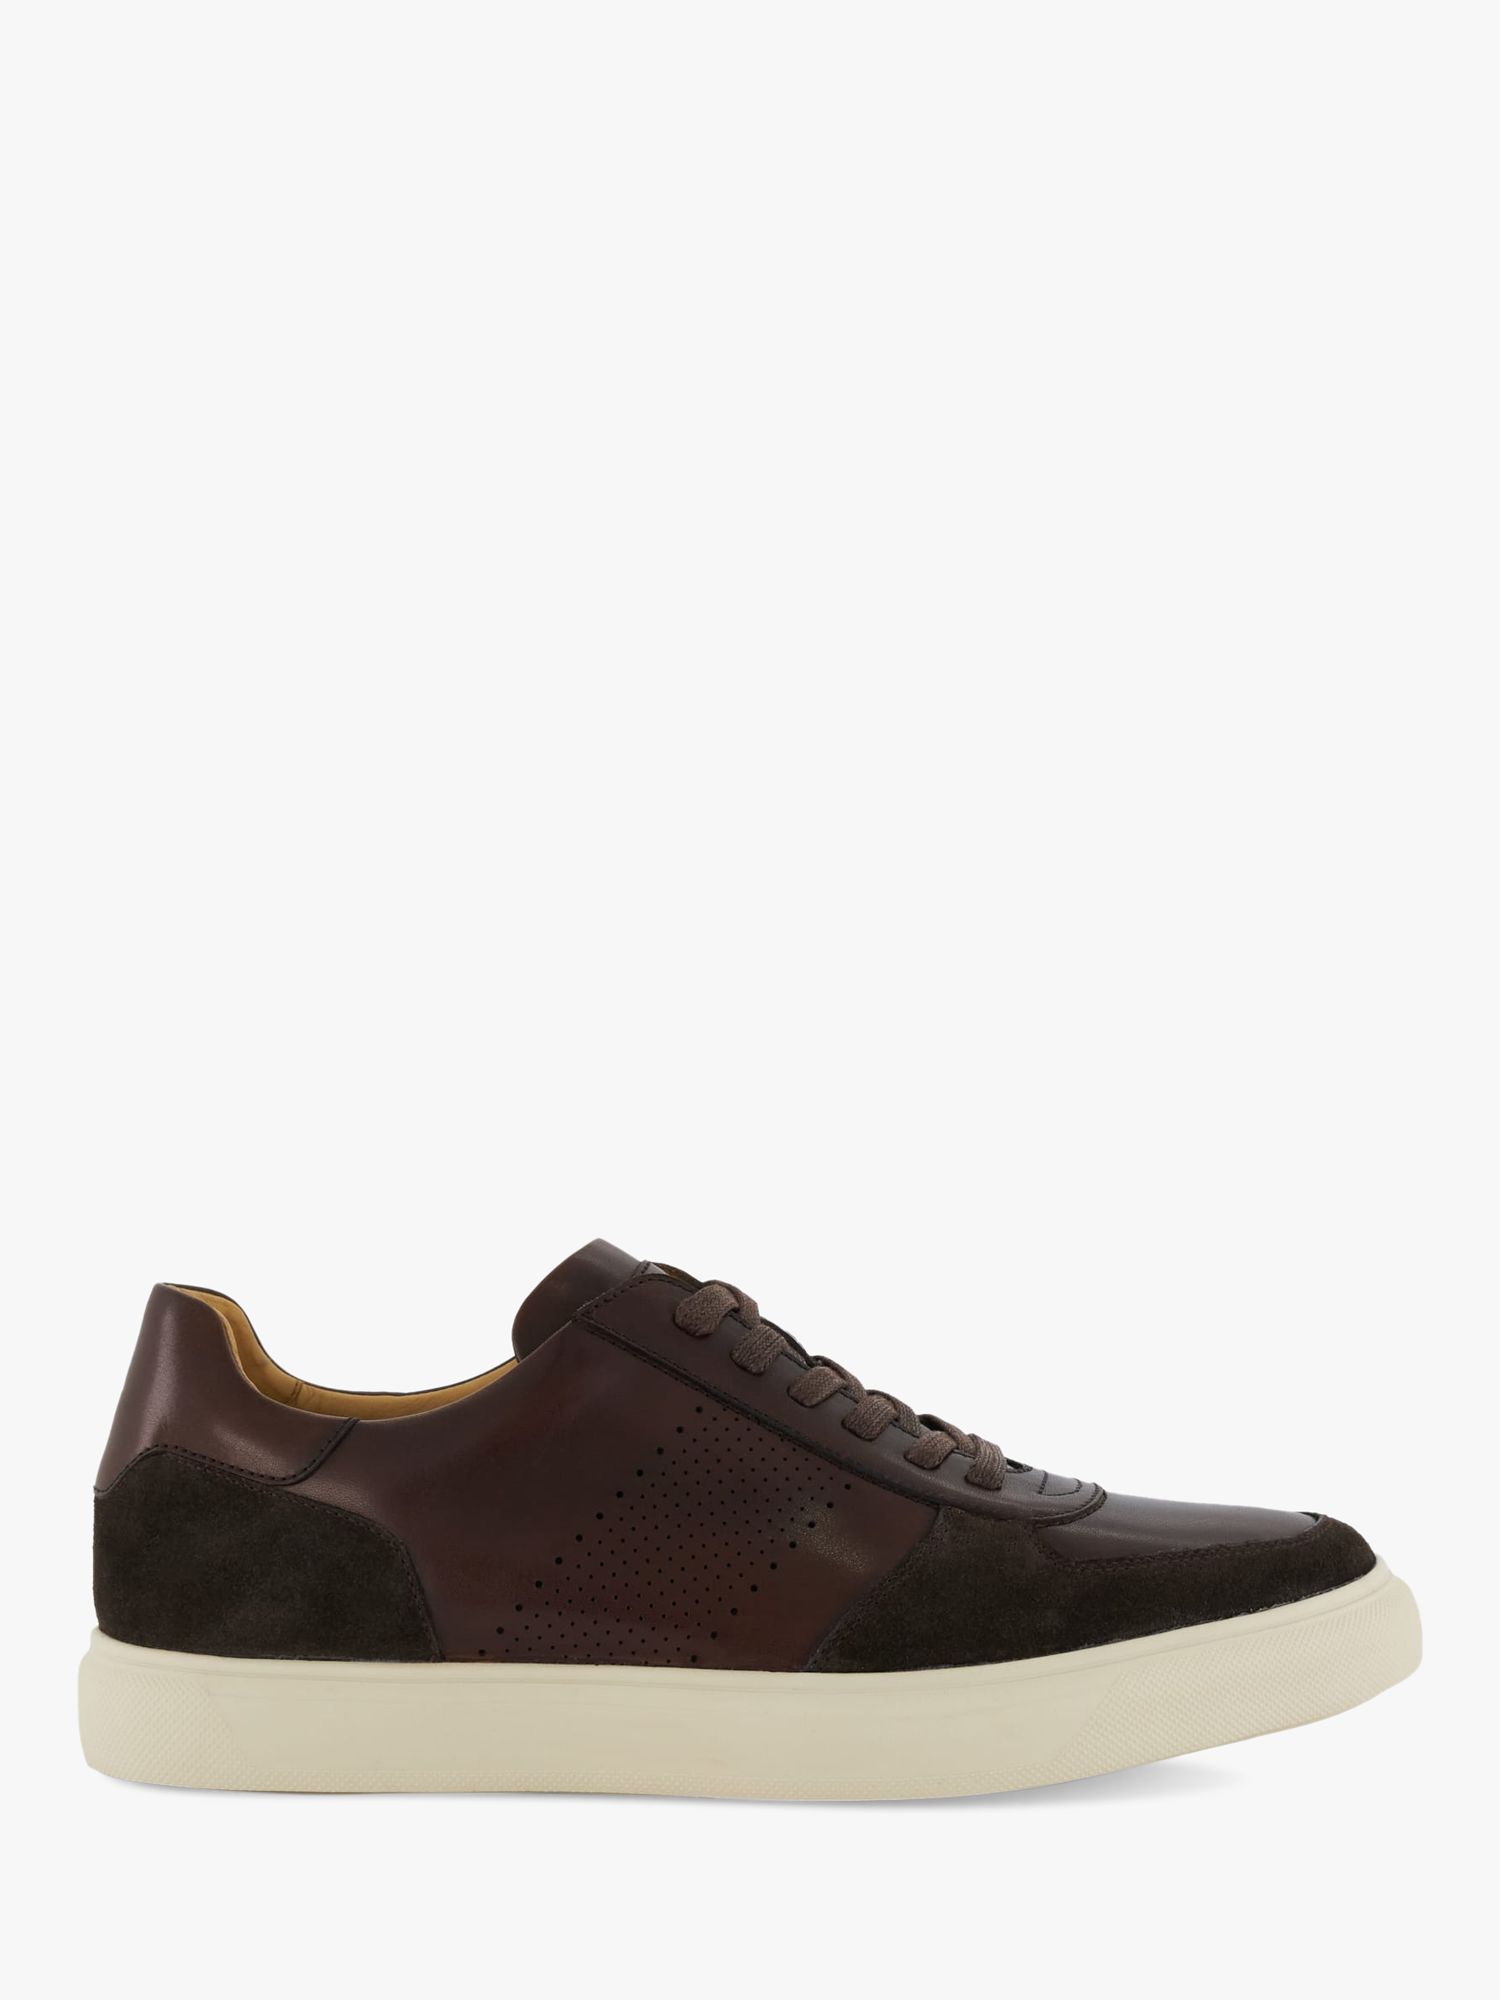 Dune Twickenham Leather Trainers, Brown at John Lewis & Partners